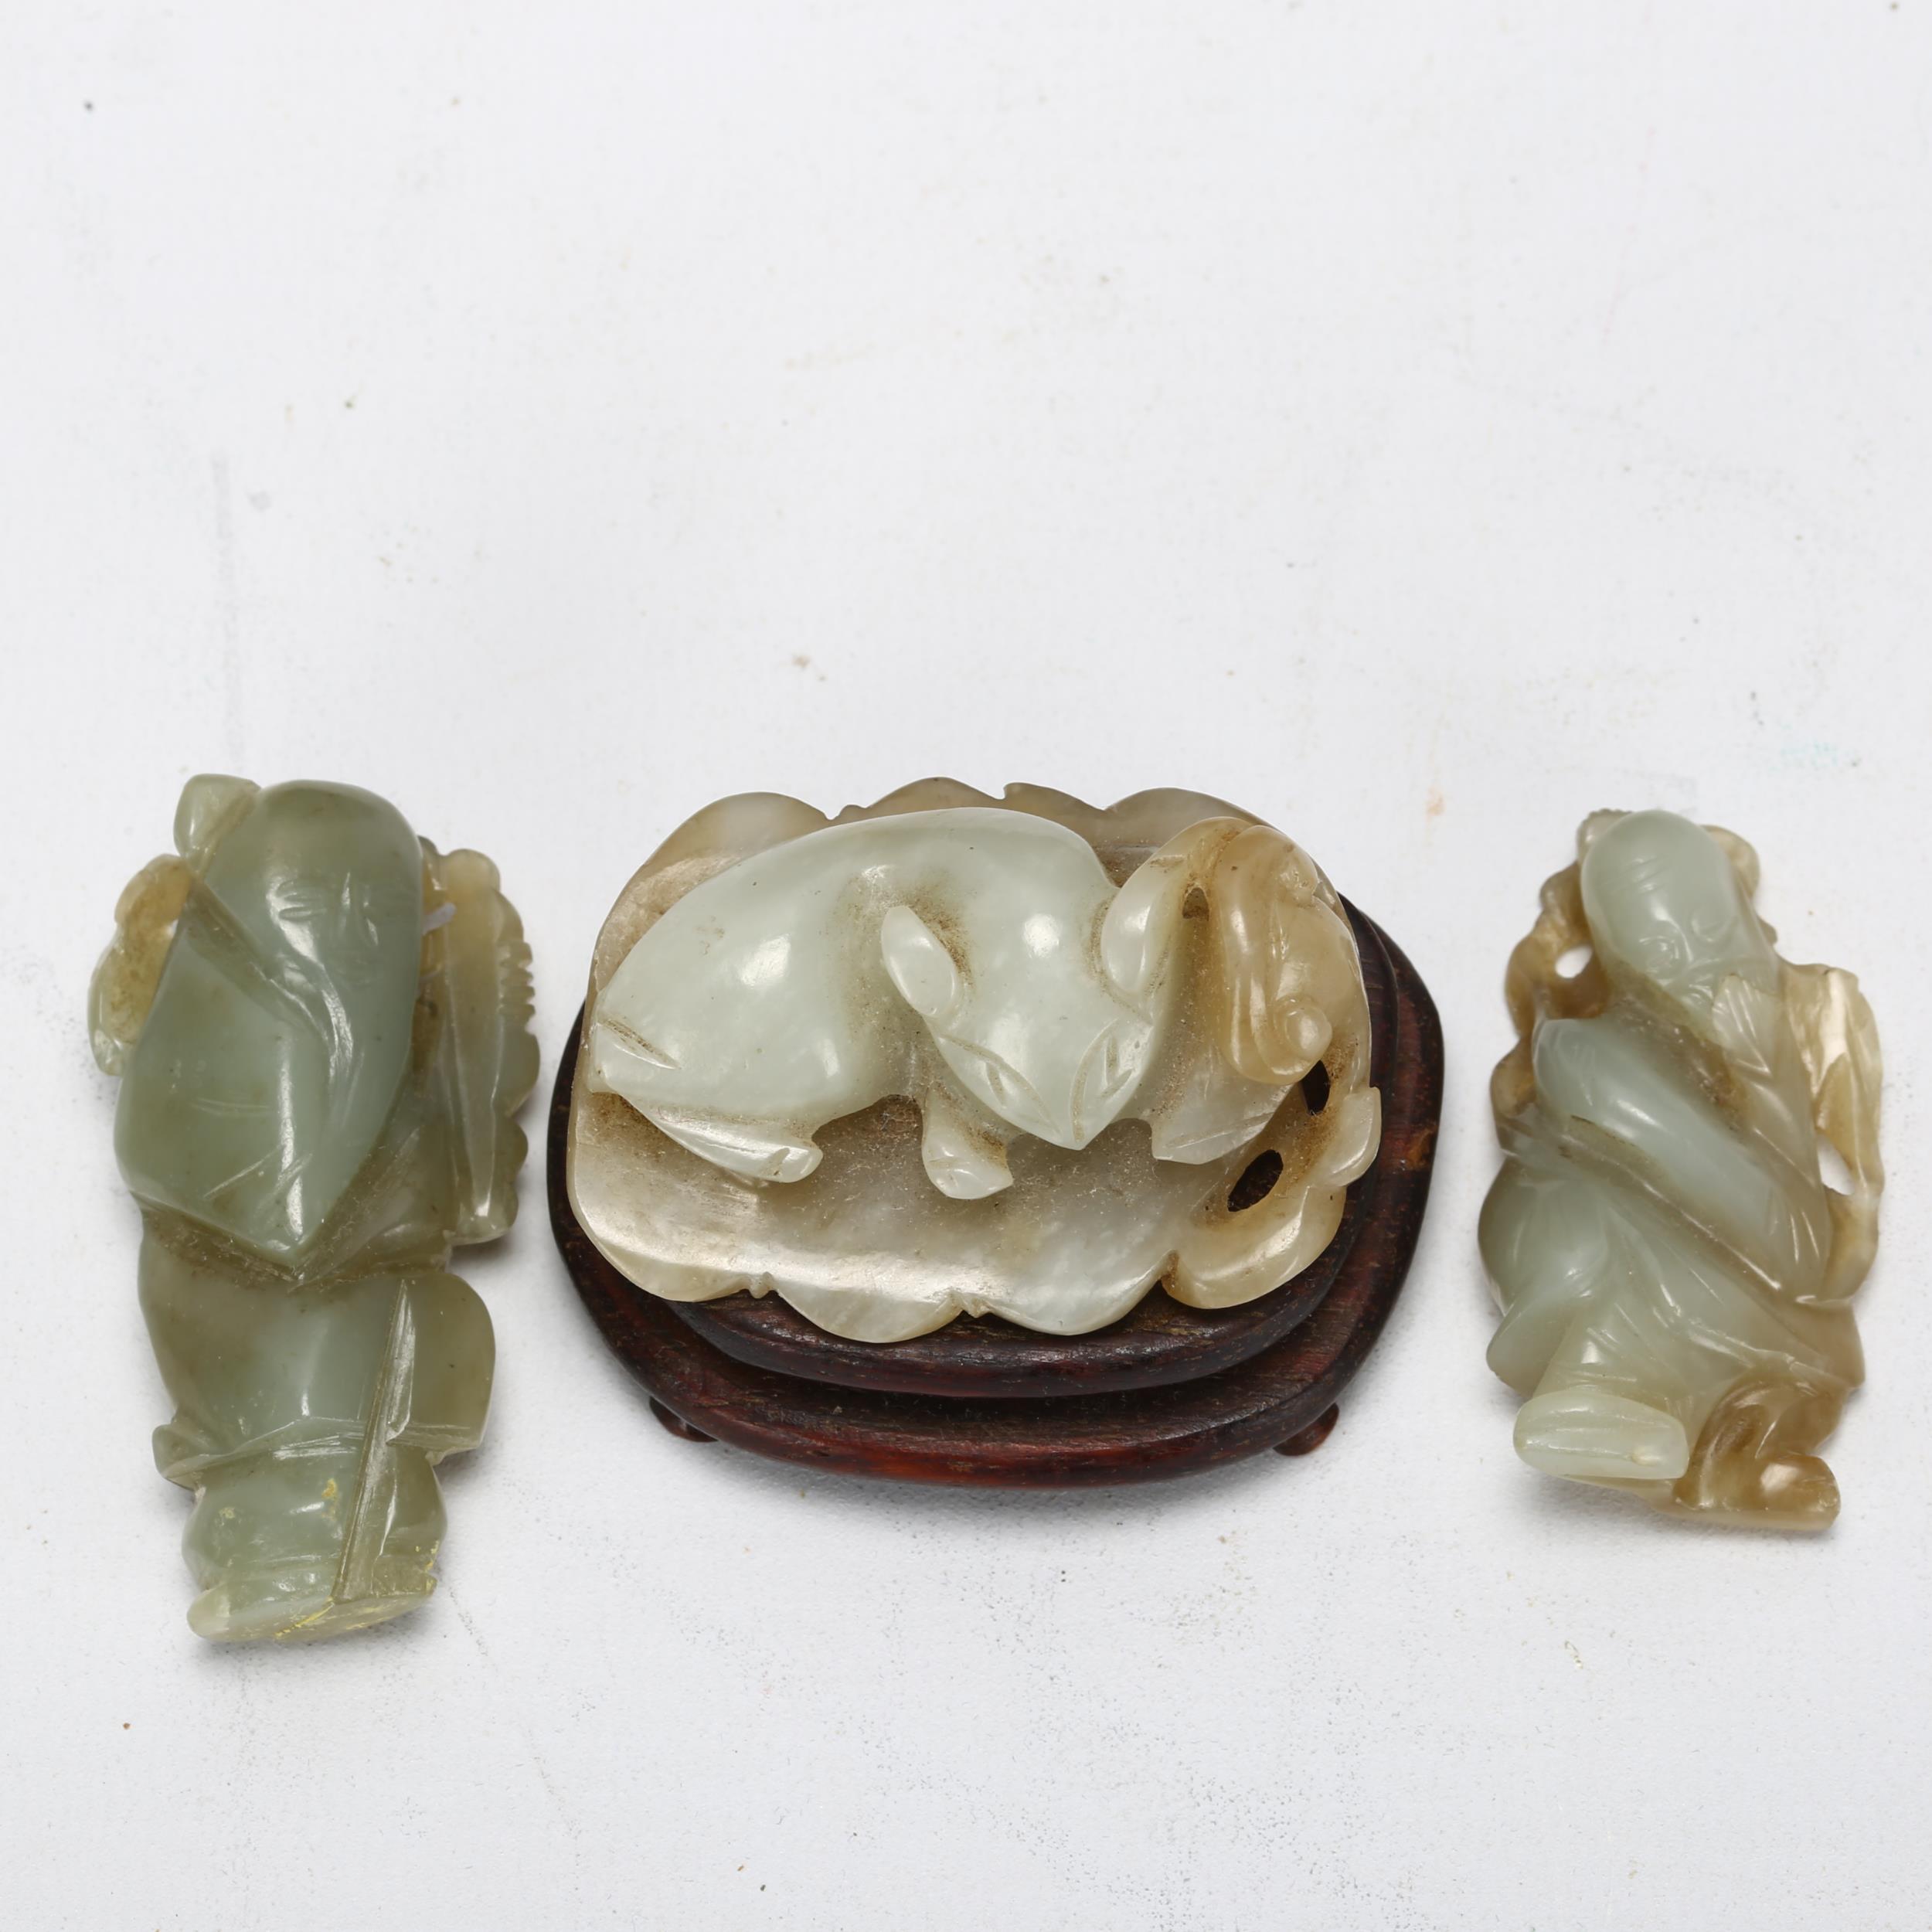 3 Chinese jade figures, 1 on wooden stand, largest 5.5cm All in good condition, no chips cracks or - Image 2 of 3